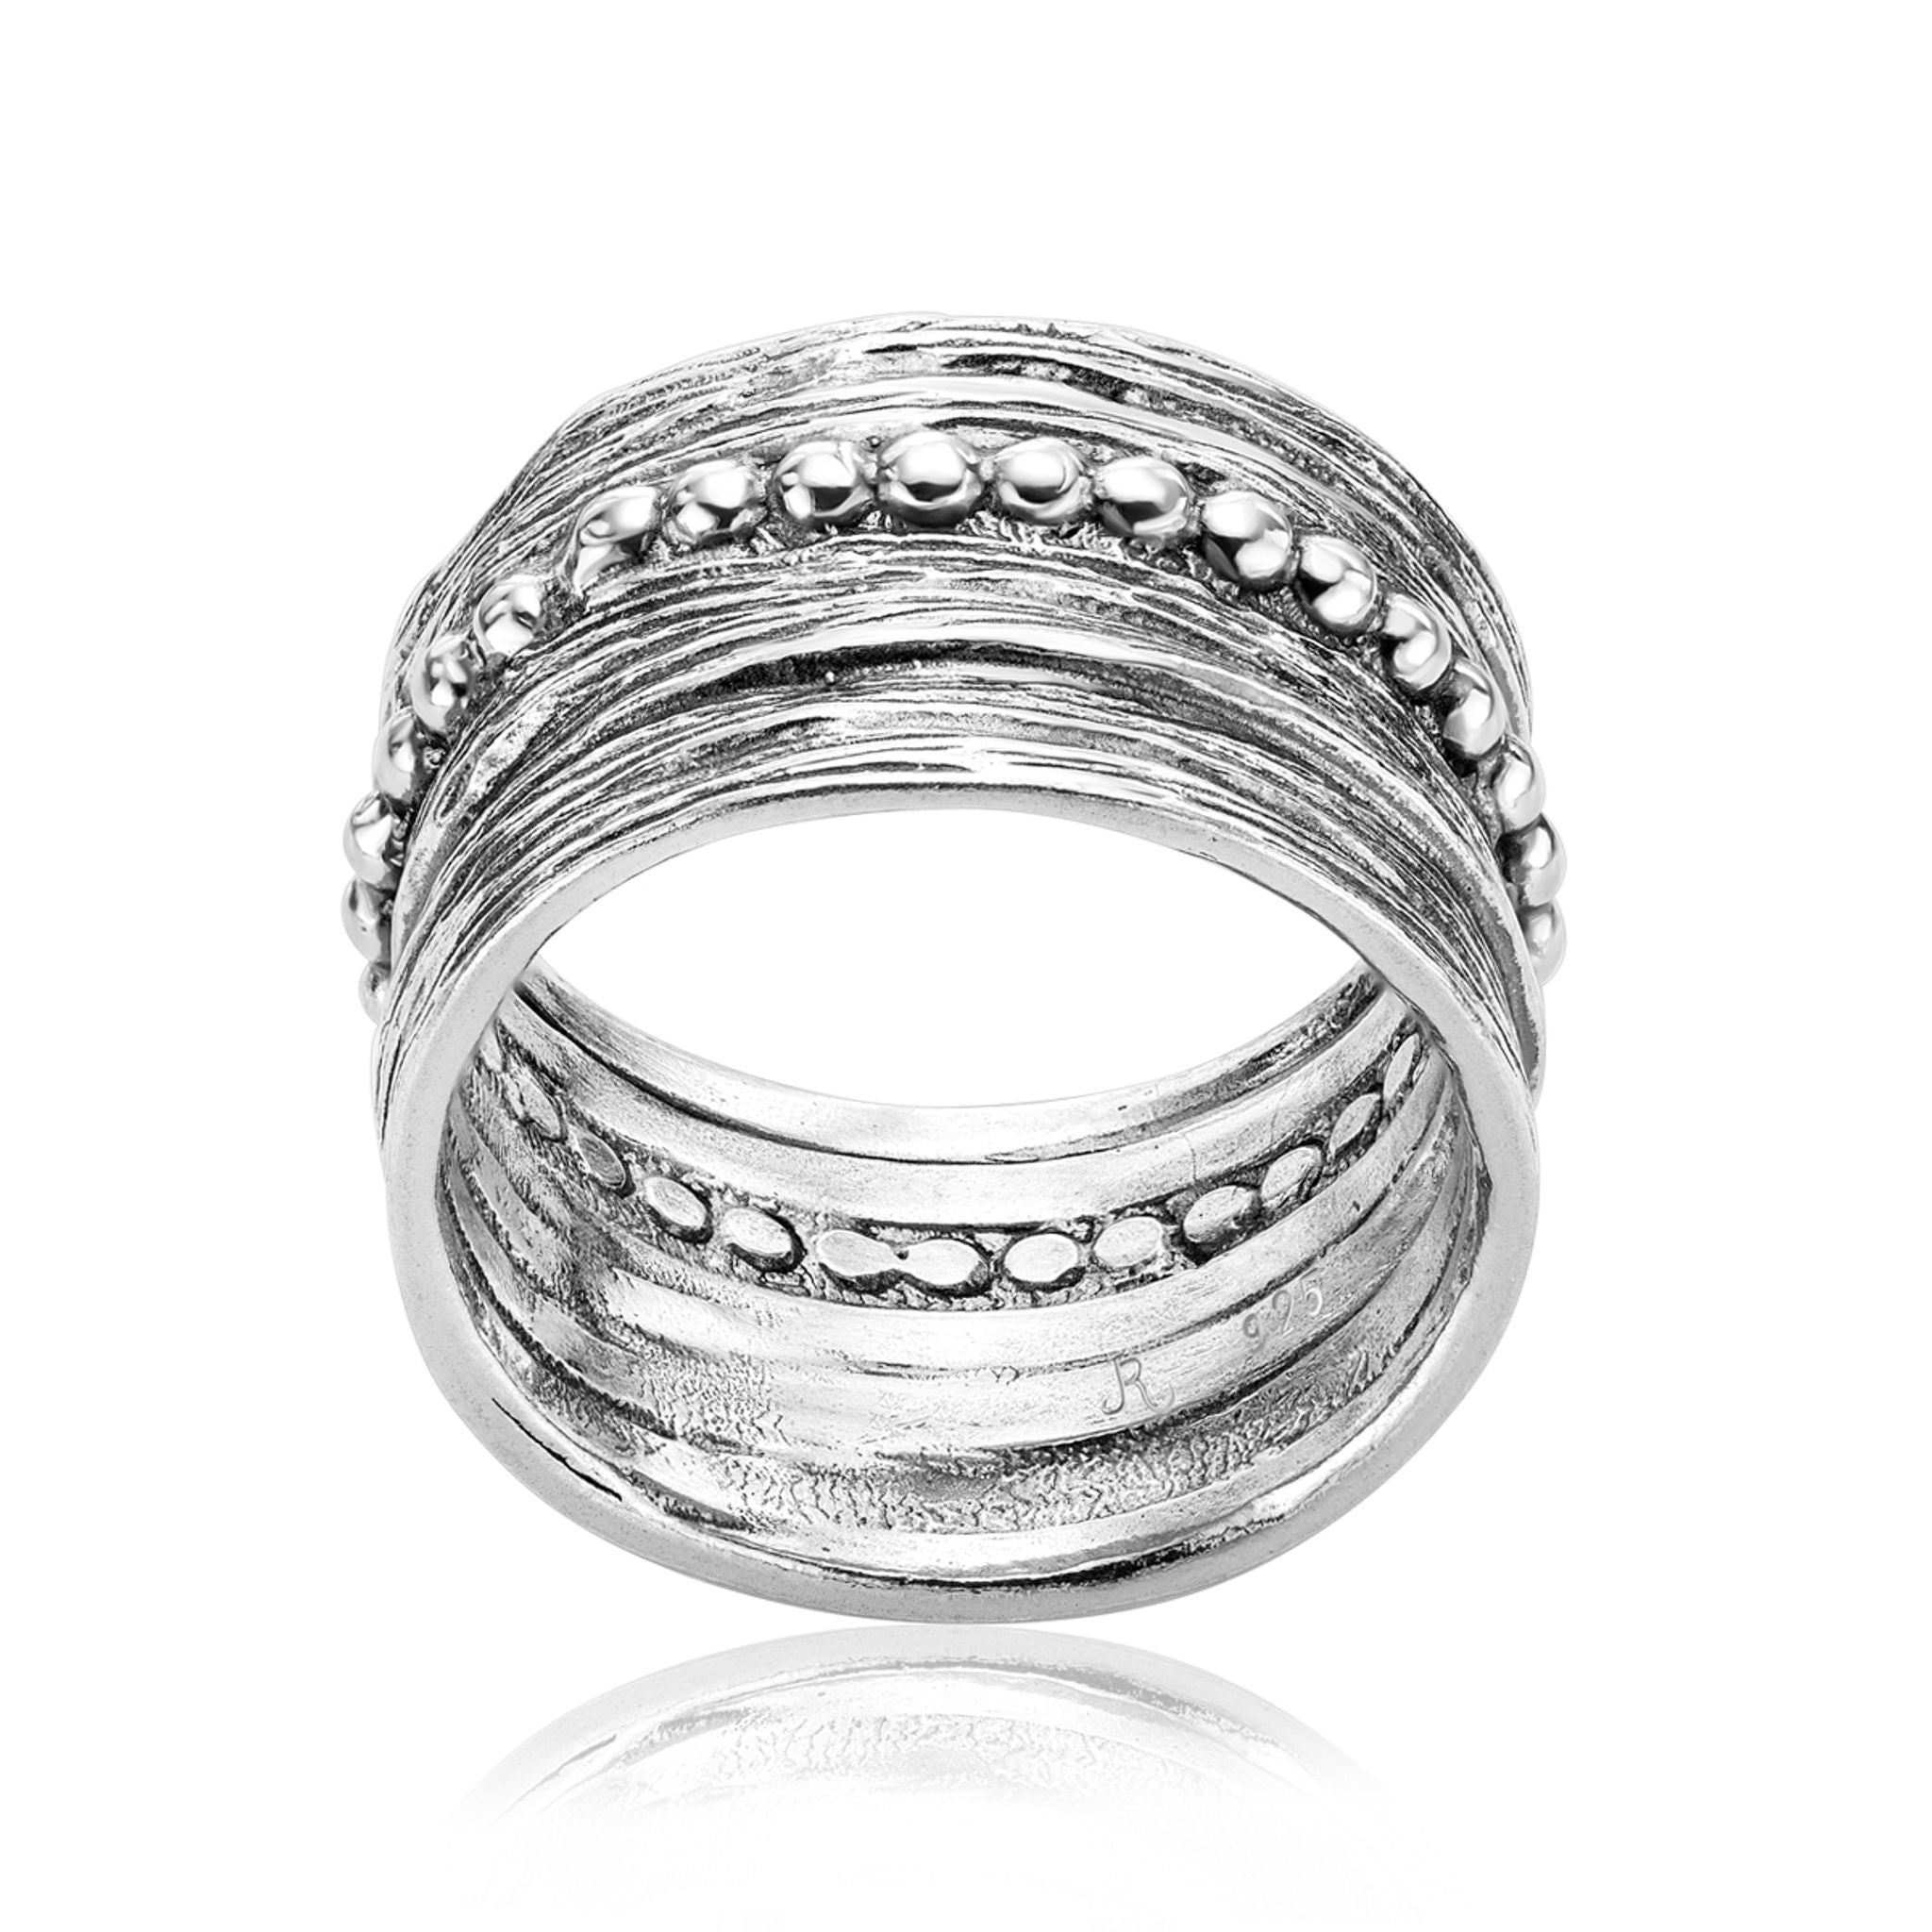 Wide Sterling Silver Bead Ring